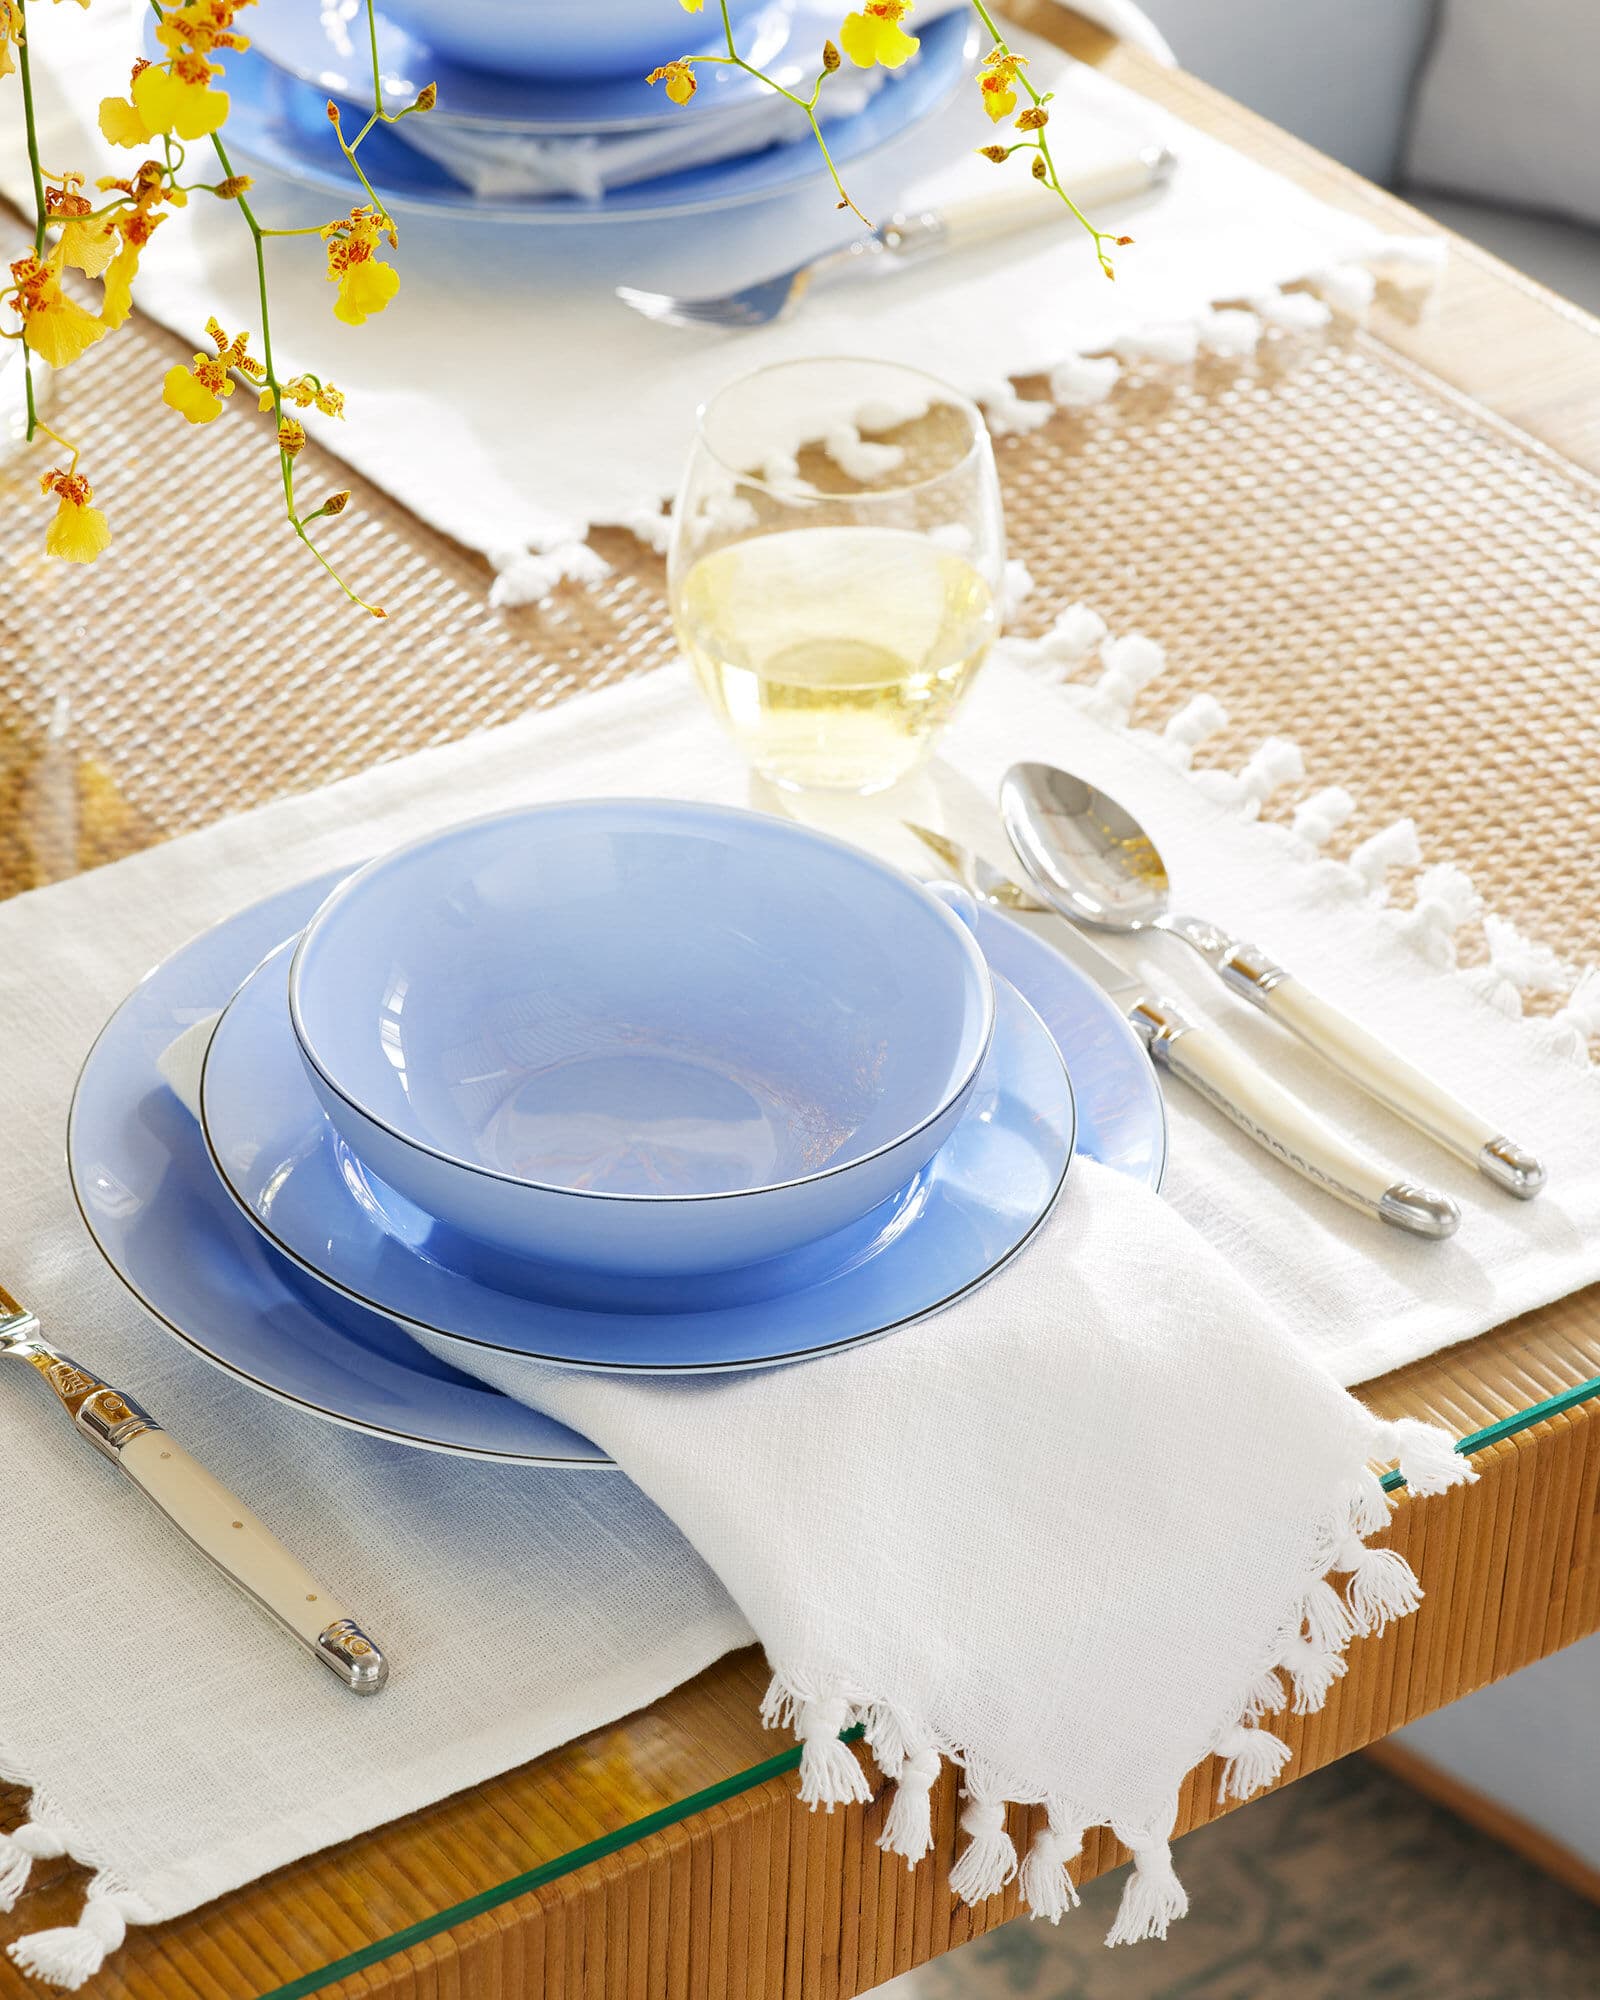 Tablesetting in blue and white from Serena & lily - tablescape - tabletop - table decor - table linens - sophistication